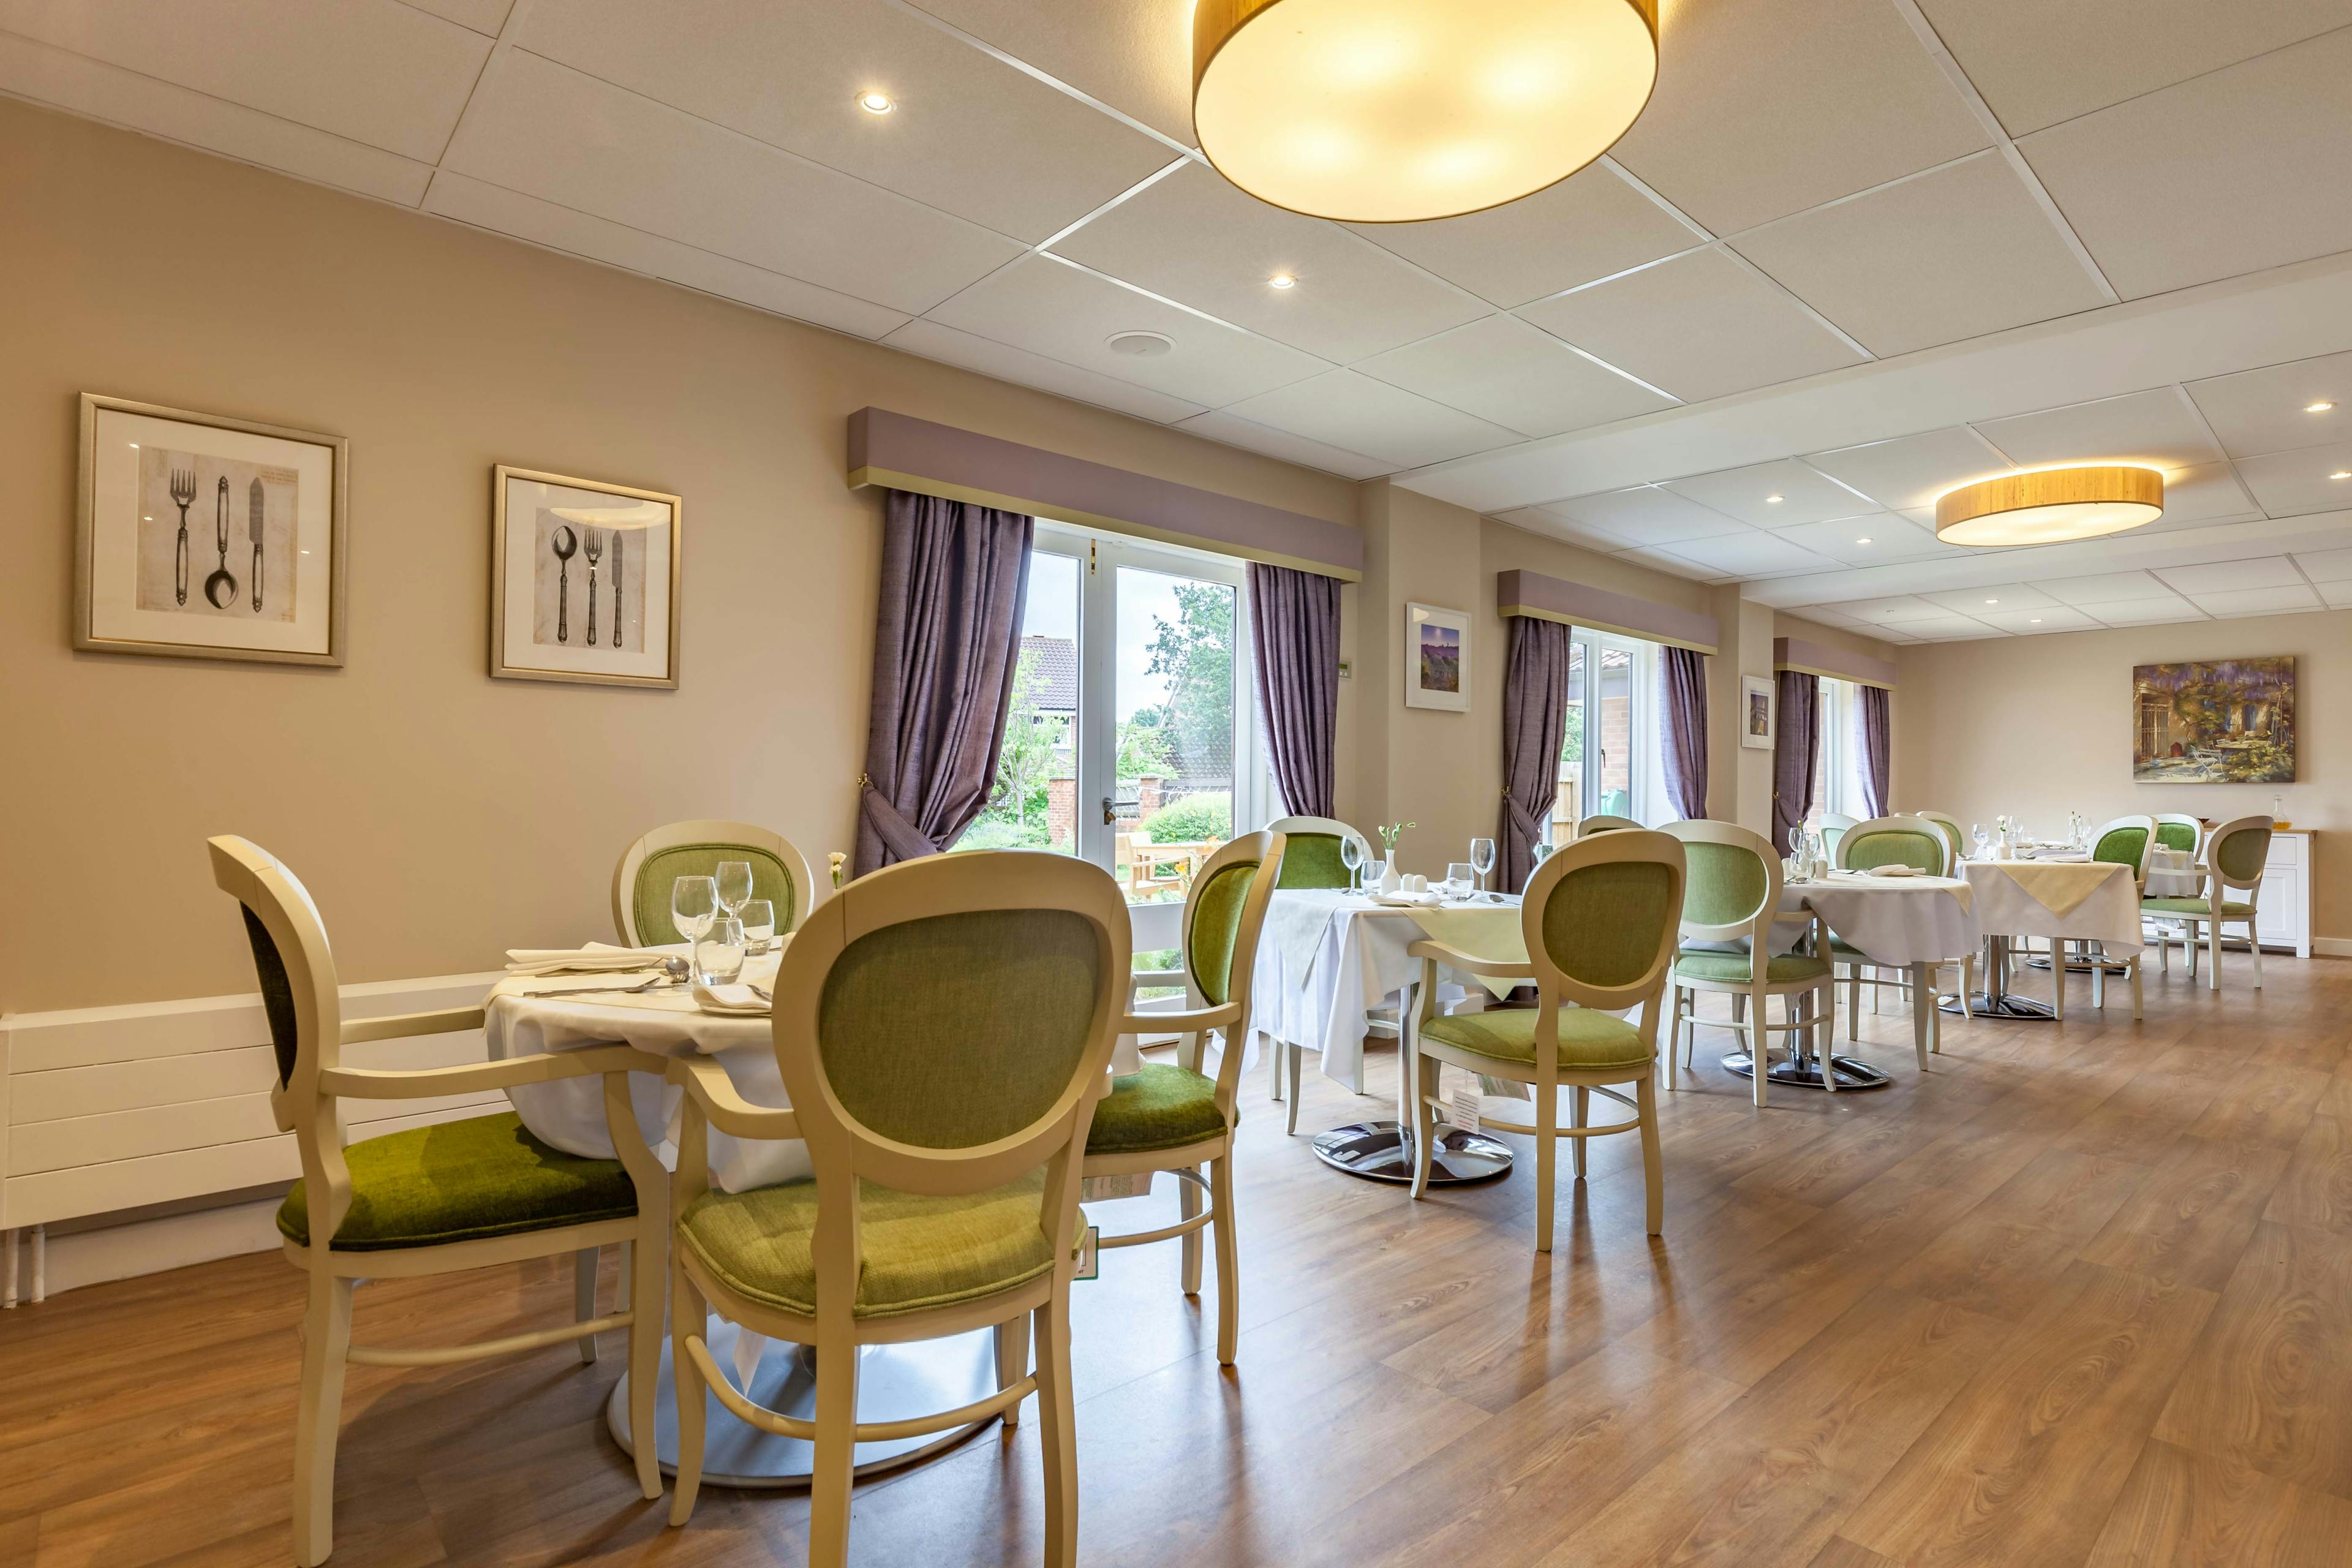 Dining Room at Lindum House Care Home in Beverley, East Riding of Yorkshire